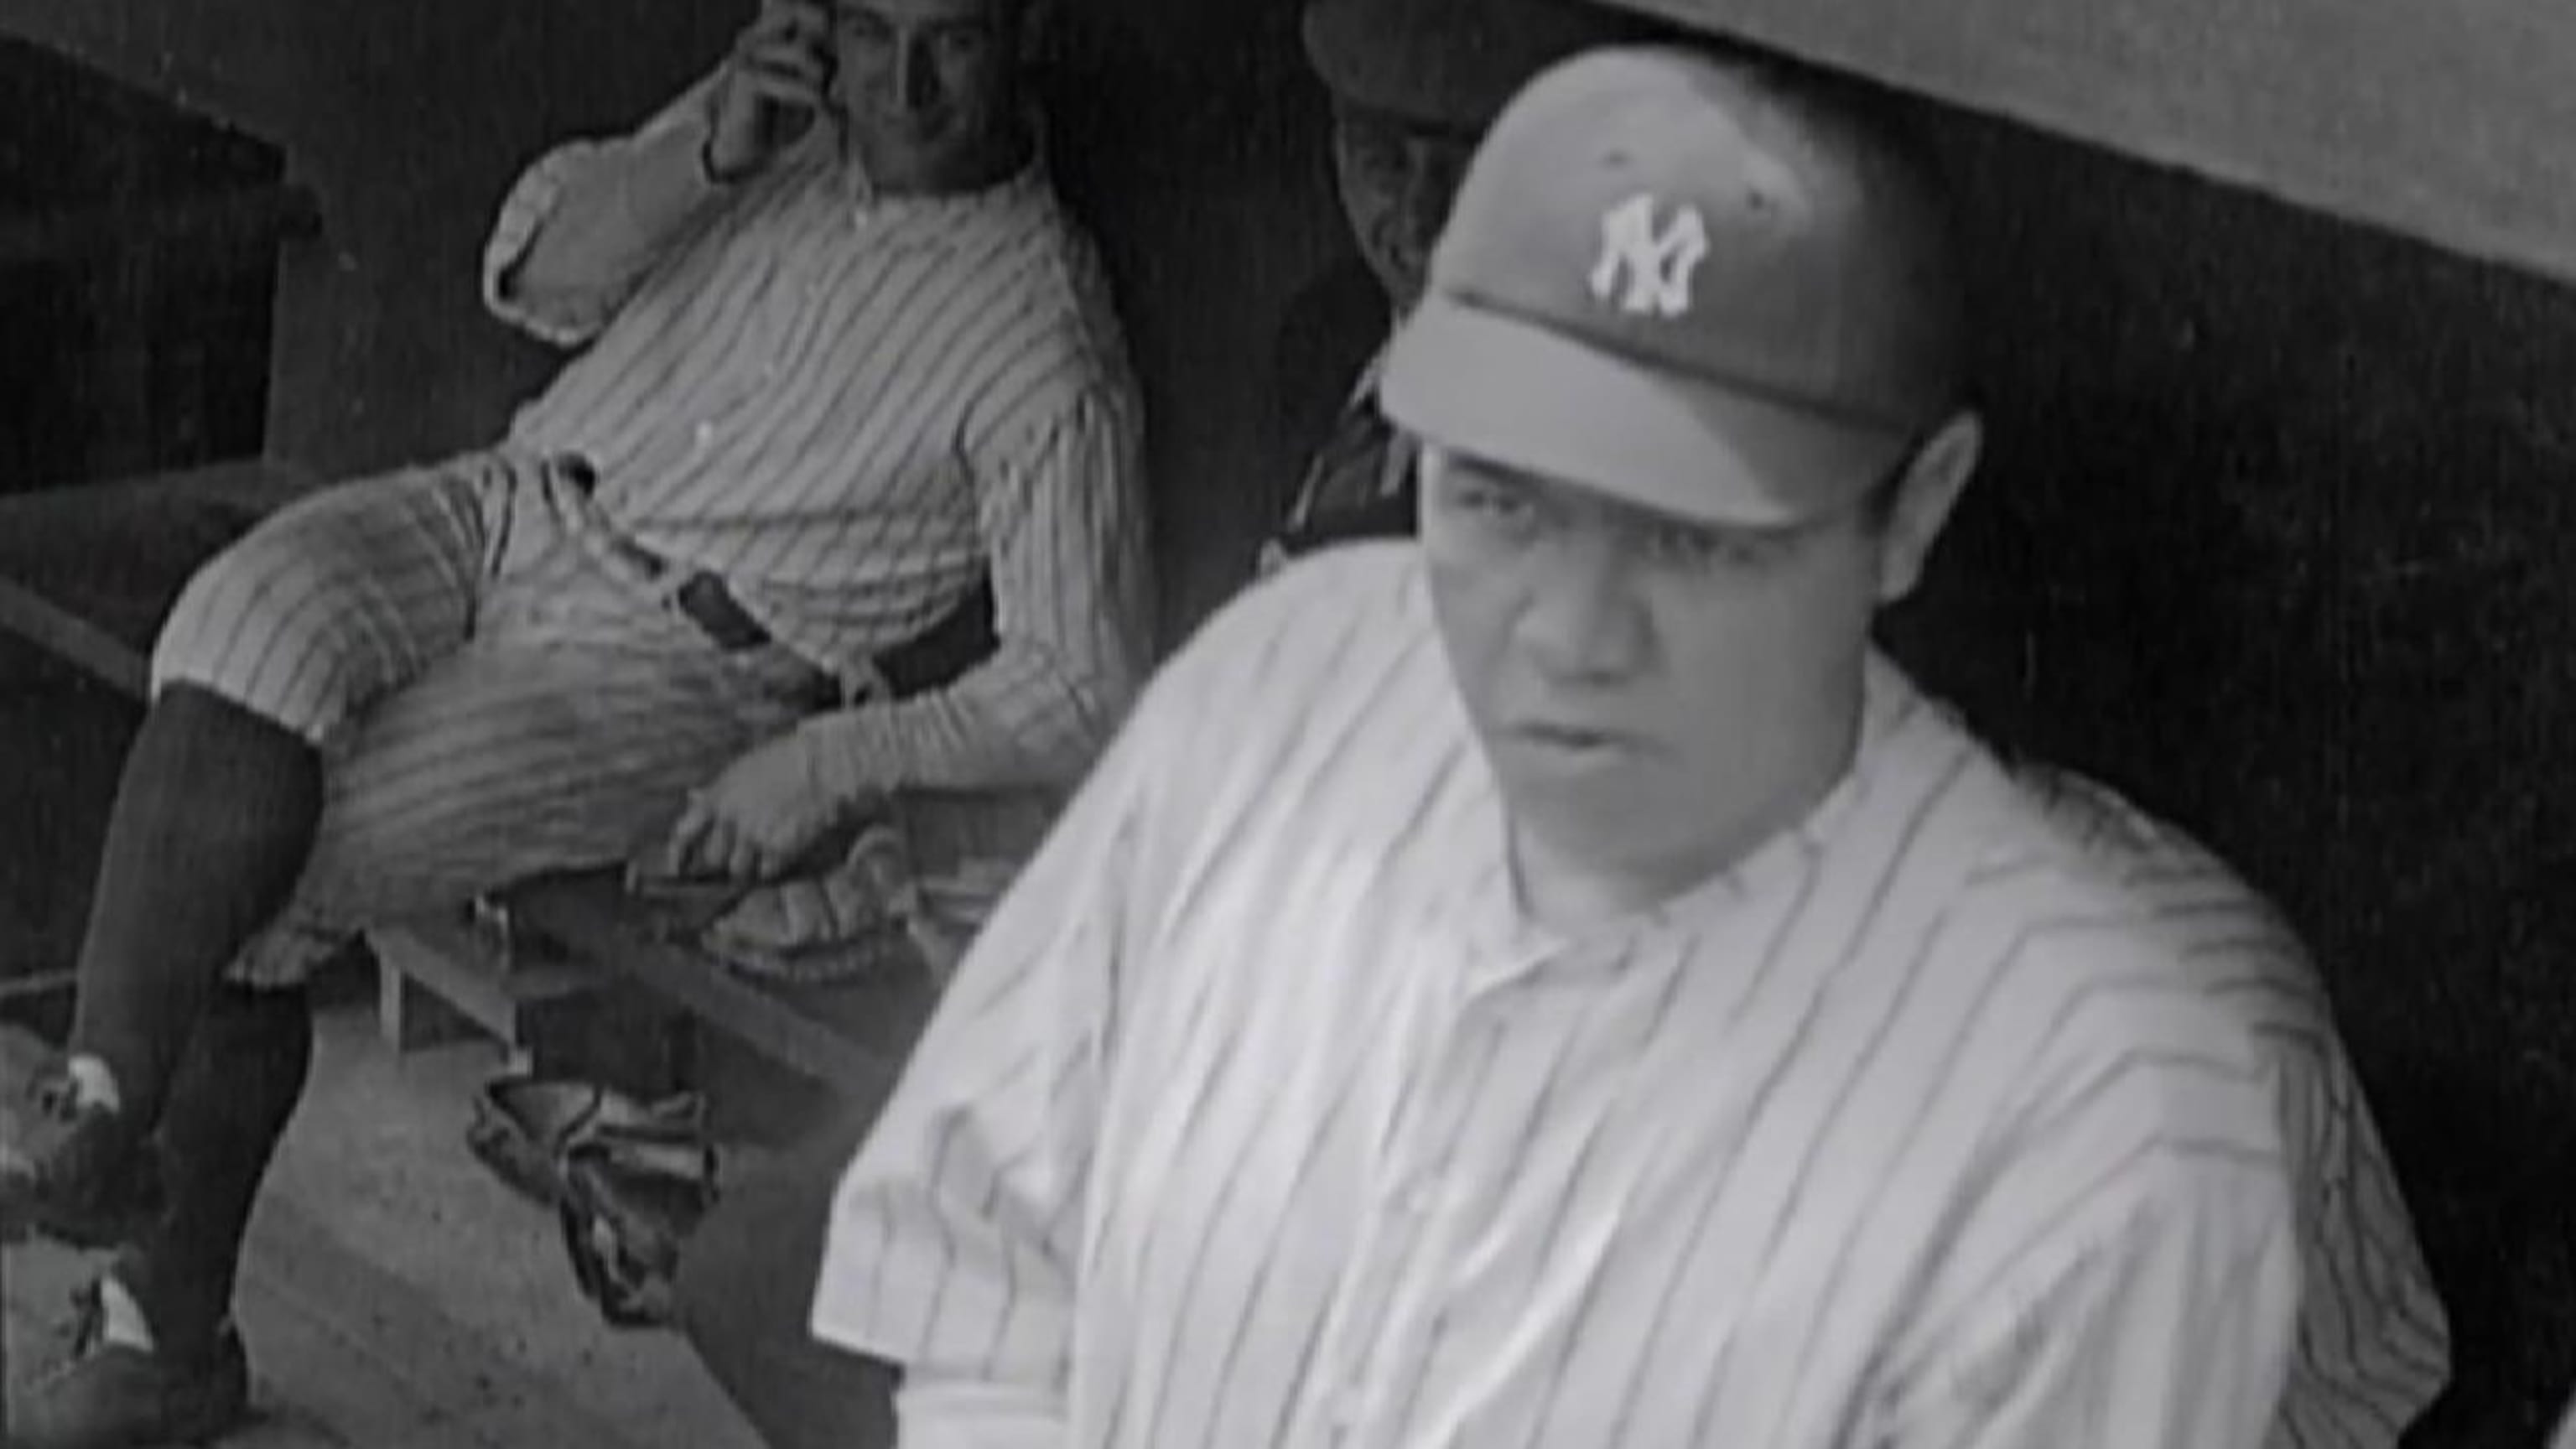 75 years after death, Lou Gehrig an immortal